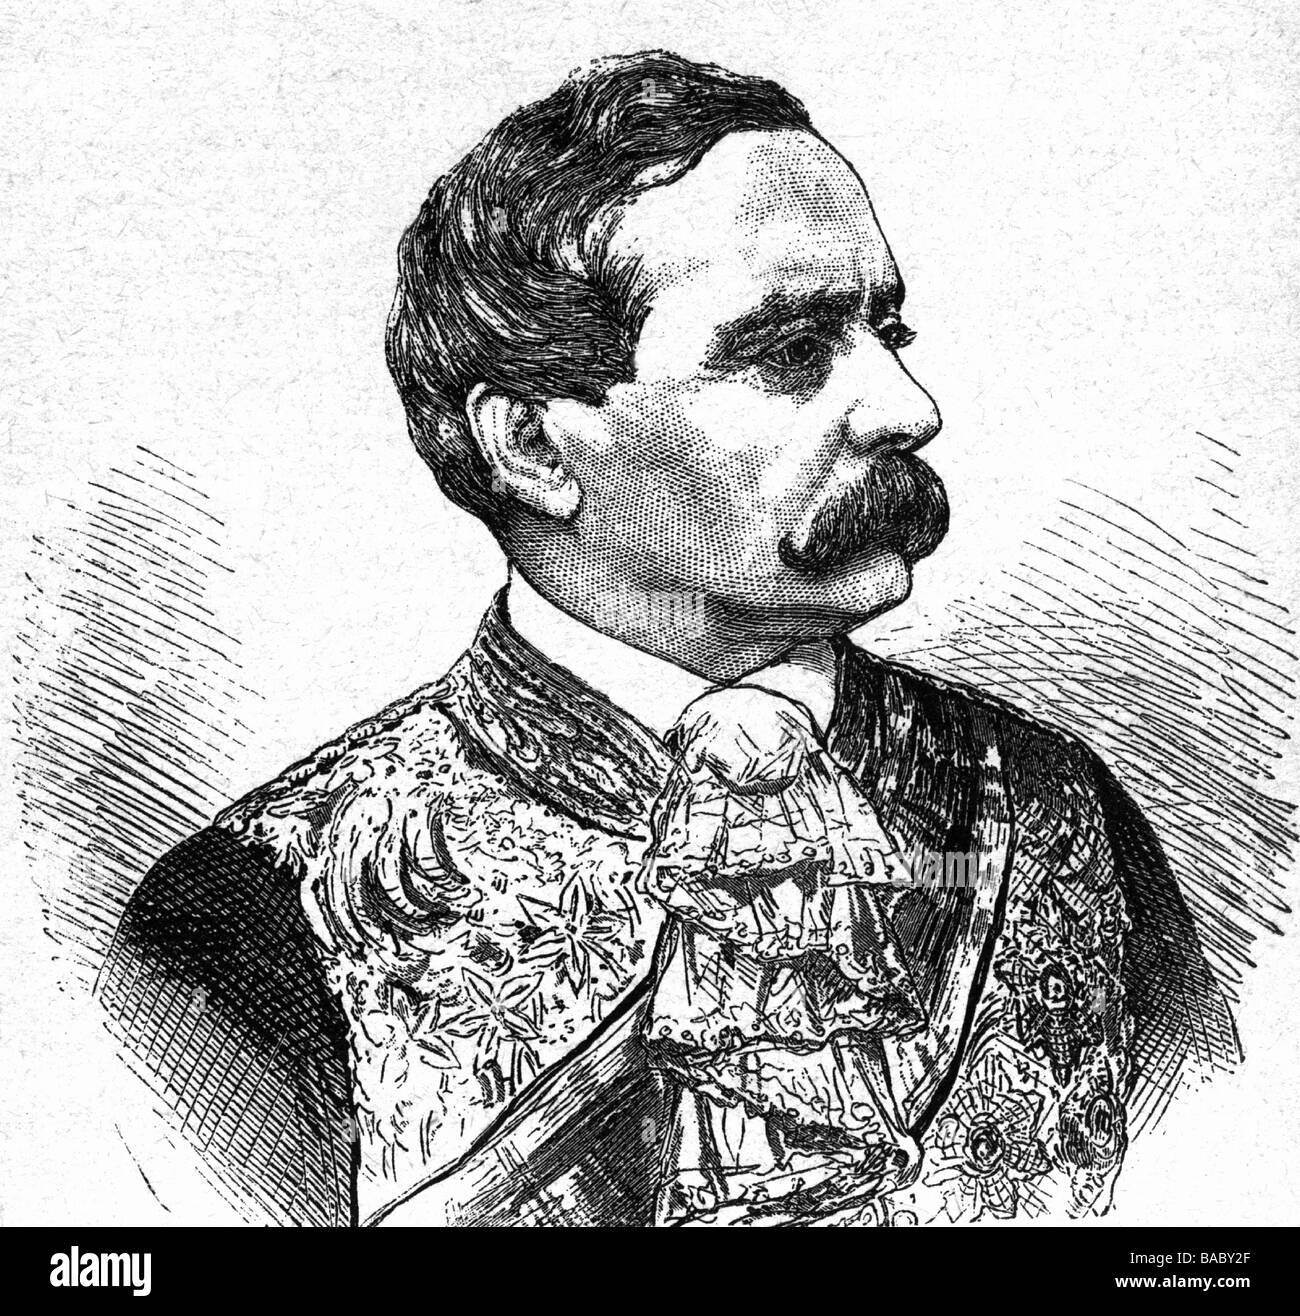 Hohenlohe-Schillingfuerst, Chlodwig Prince of, 31.3.1819 - 6.7.1901, German politician, Prime Minister and Foreign Minister of Bavaria 31.12.1866 - 18.2.1870, portrait, wood engraving, circa 1870, , Stock Photo